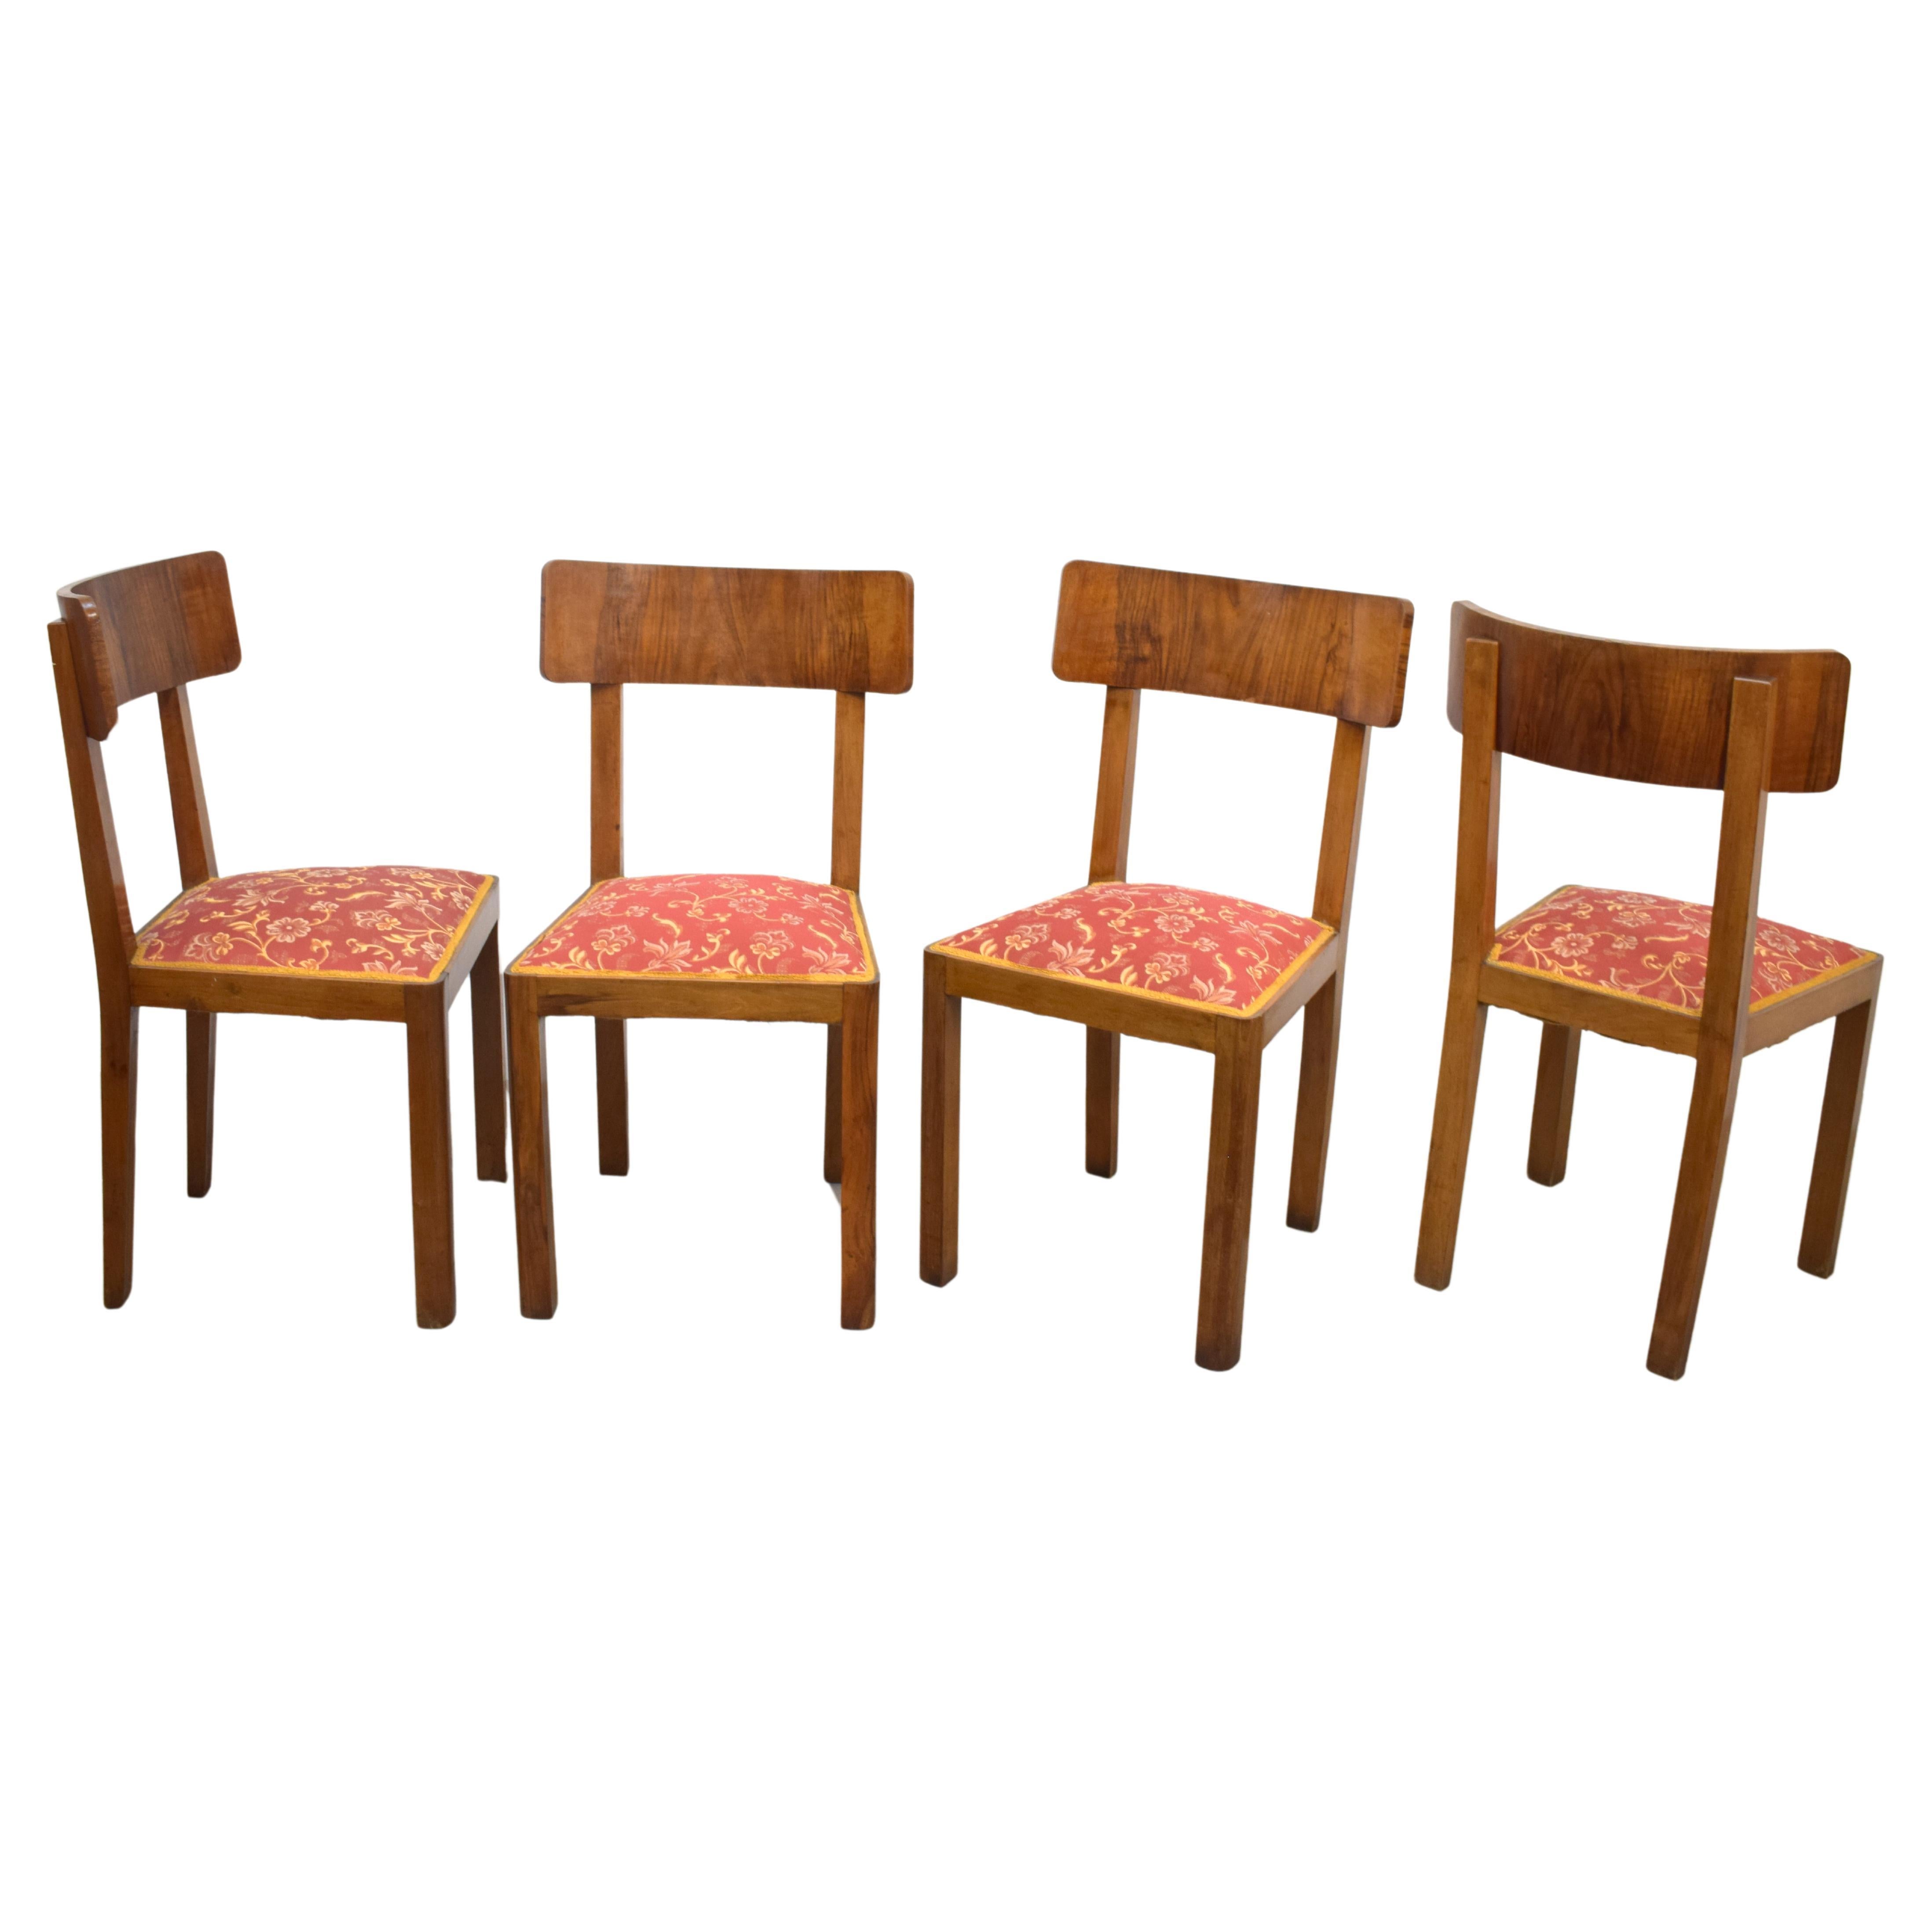 Set of 4 deco chairs, Italy, 1930s.